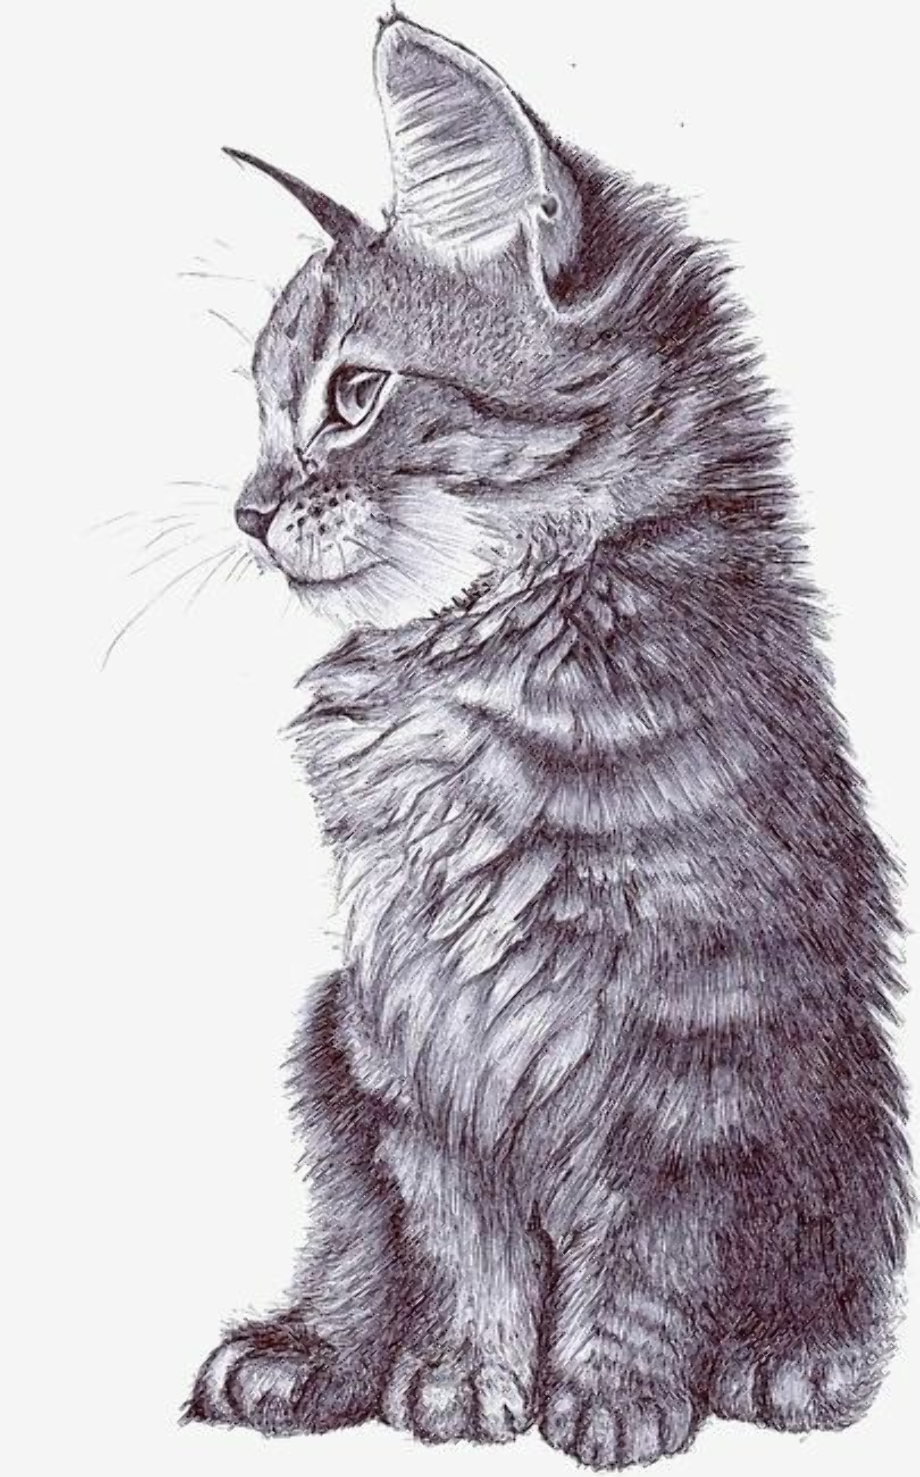 Download High Quality clipart cat realistic Transparent PNG Images